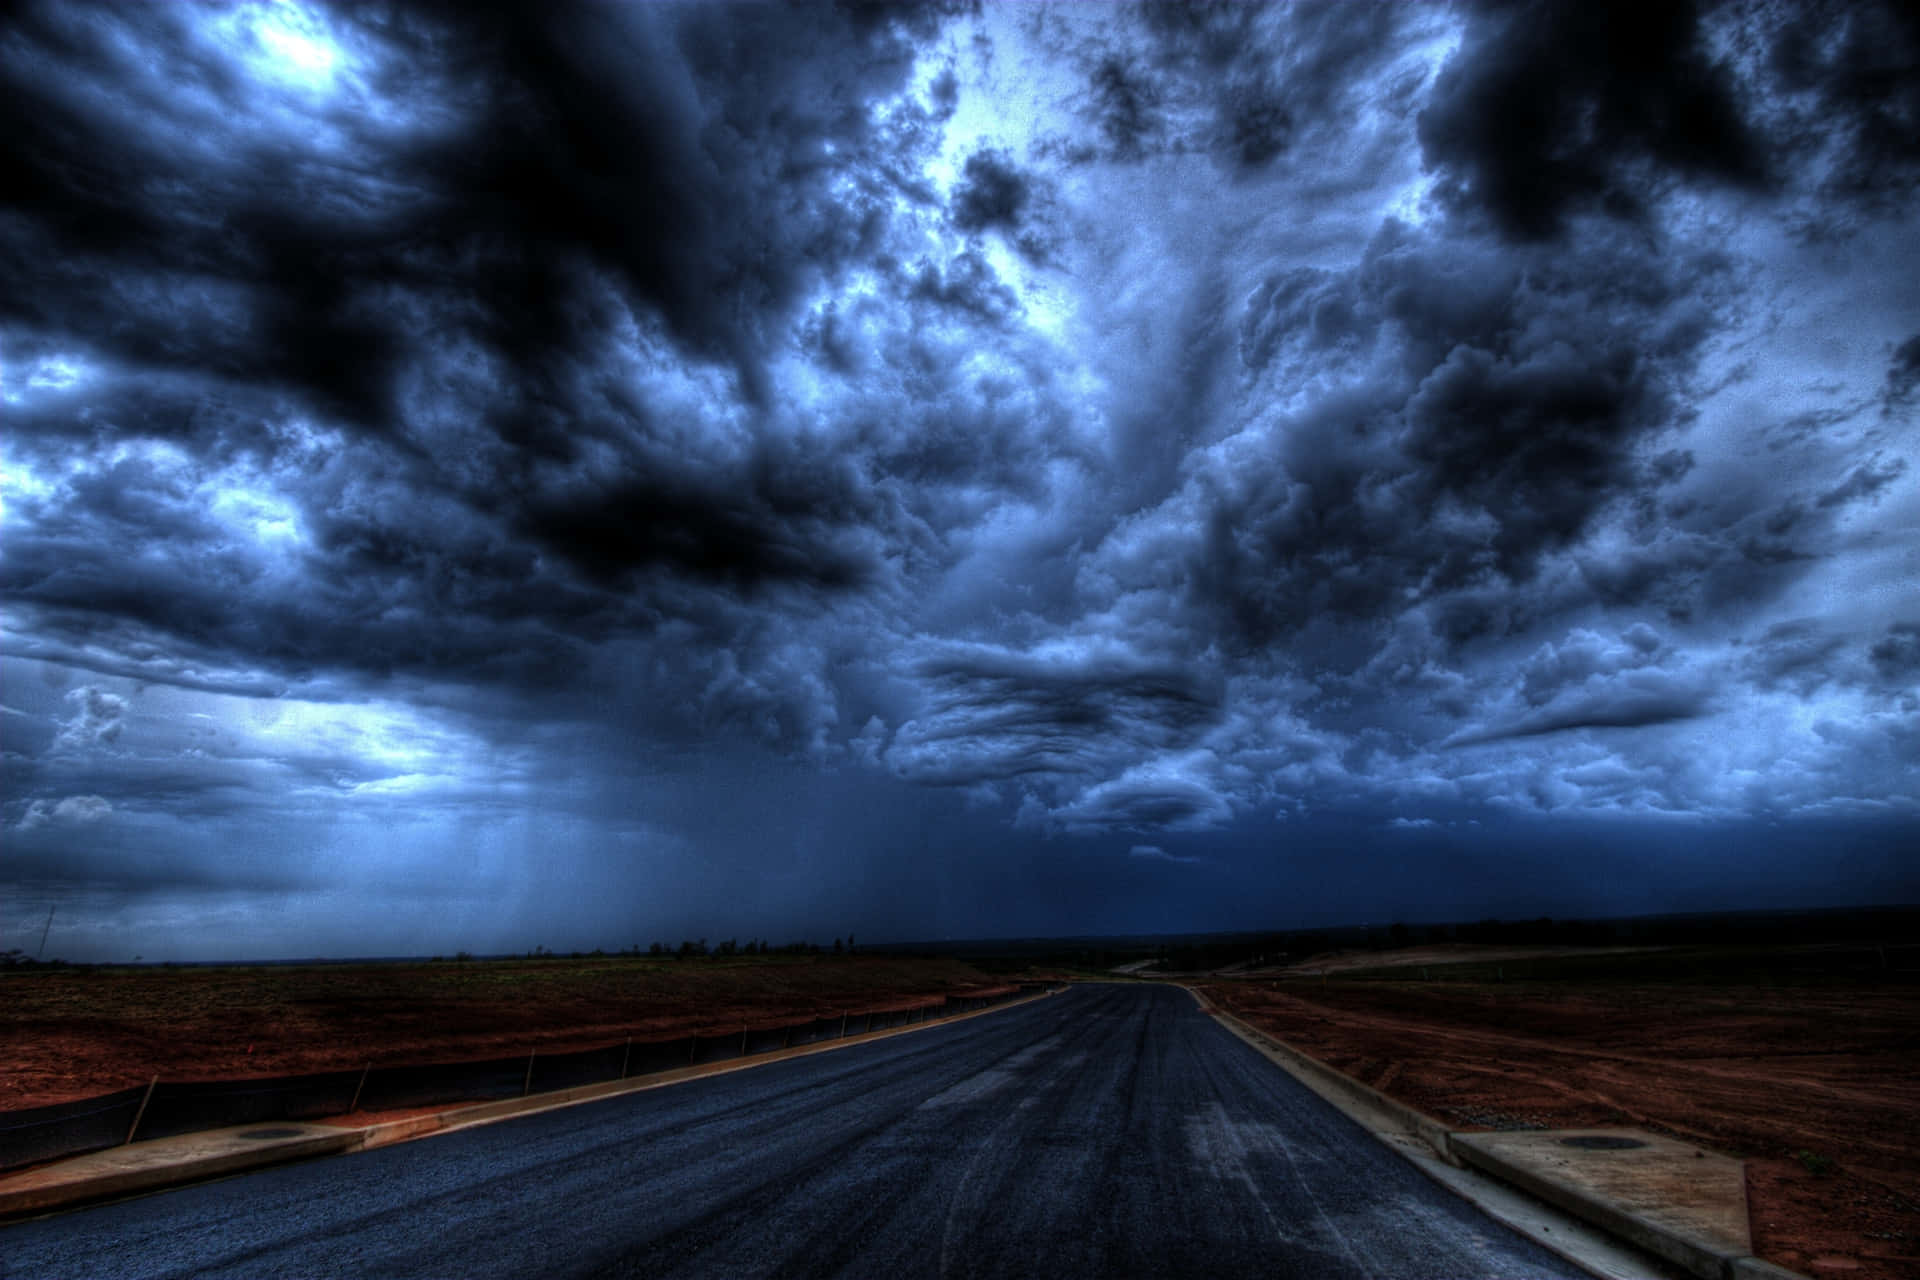 a dark sky with storm clouds over a road